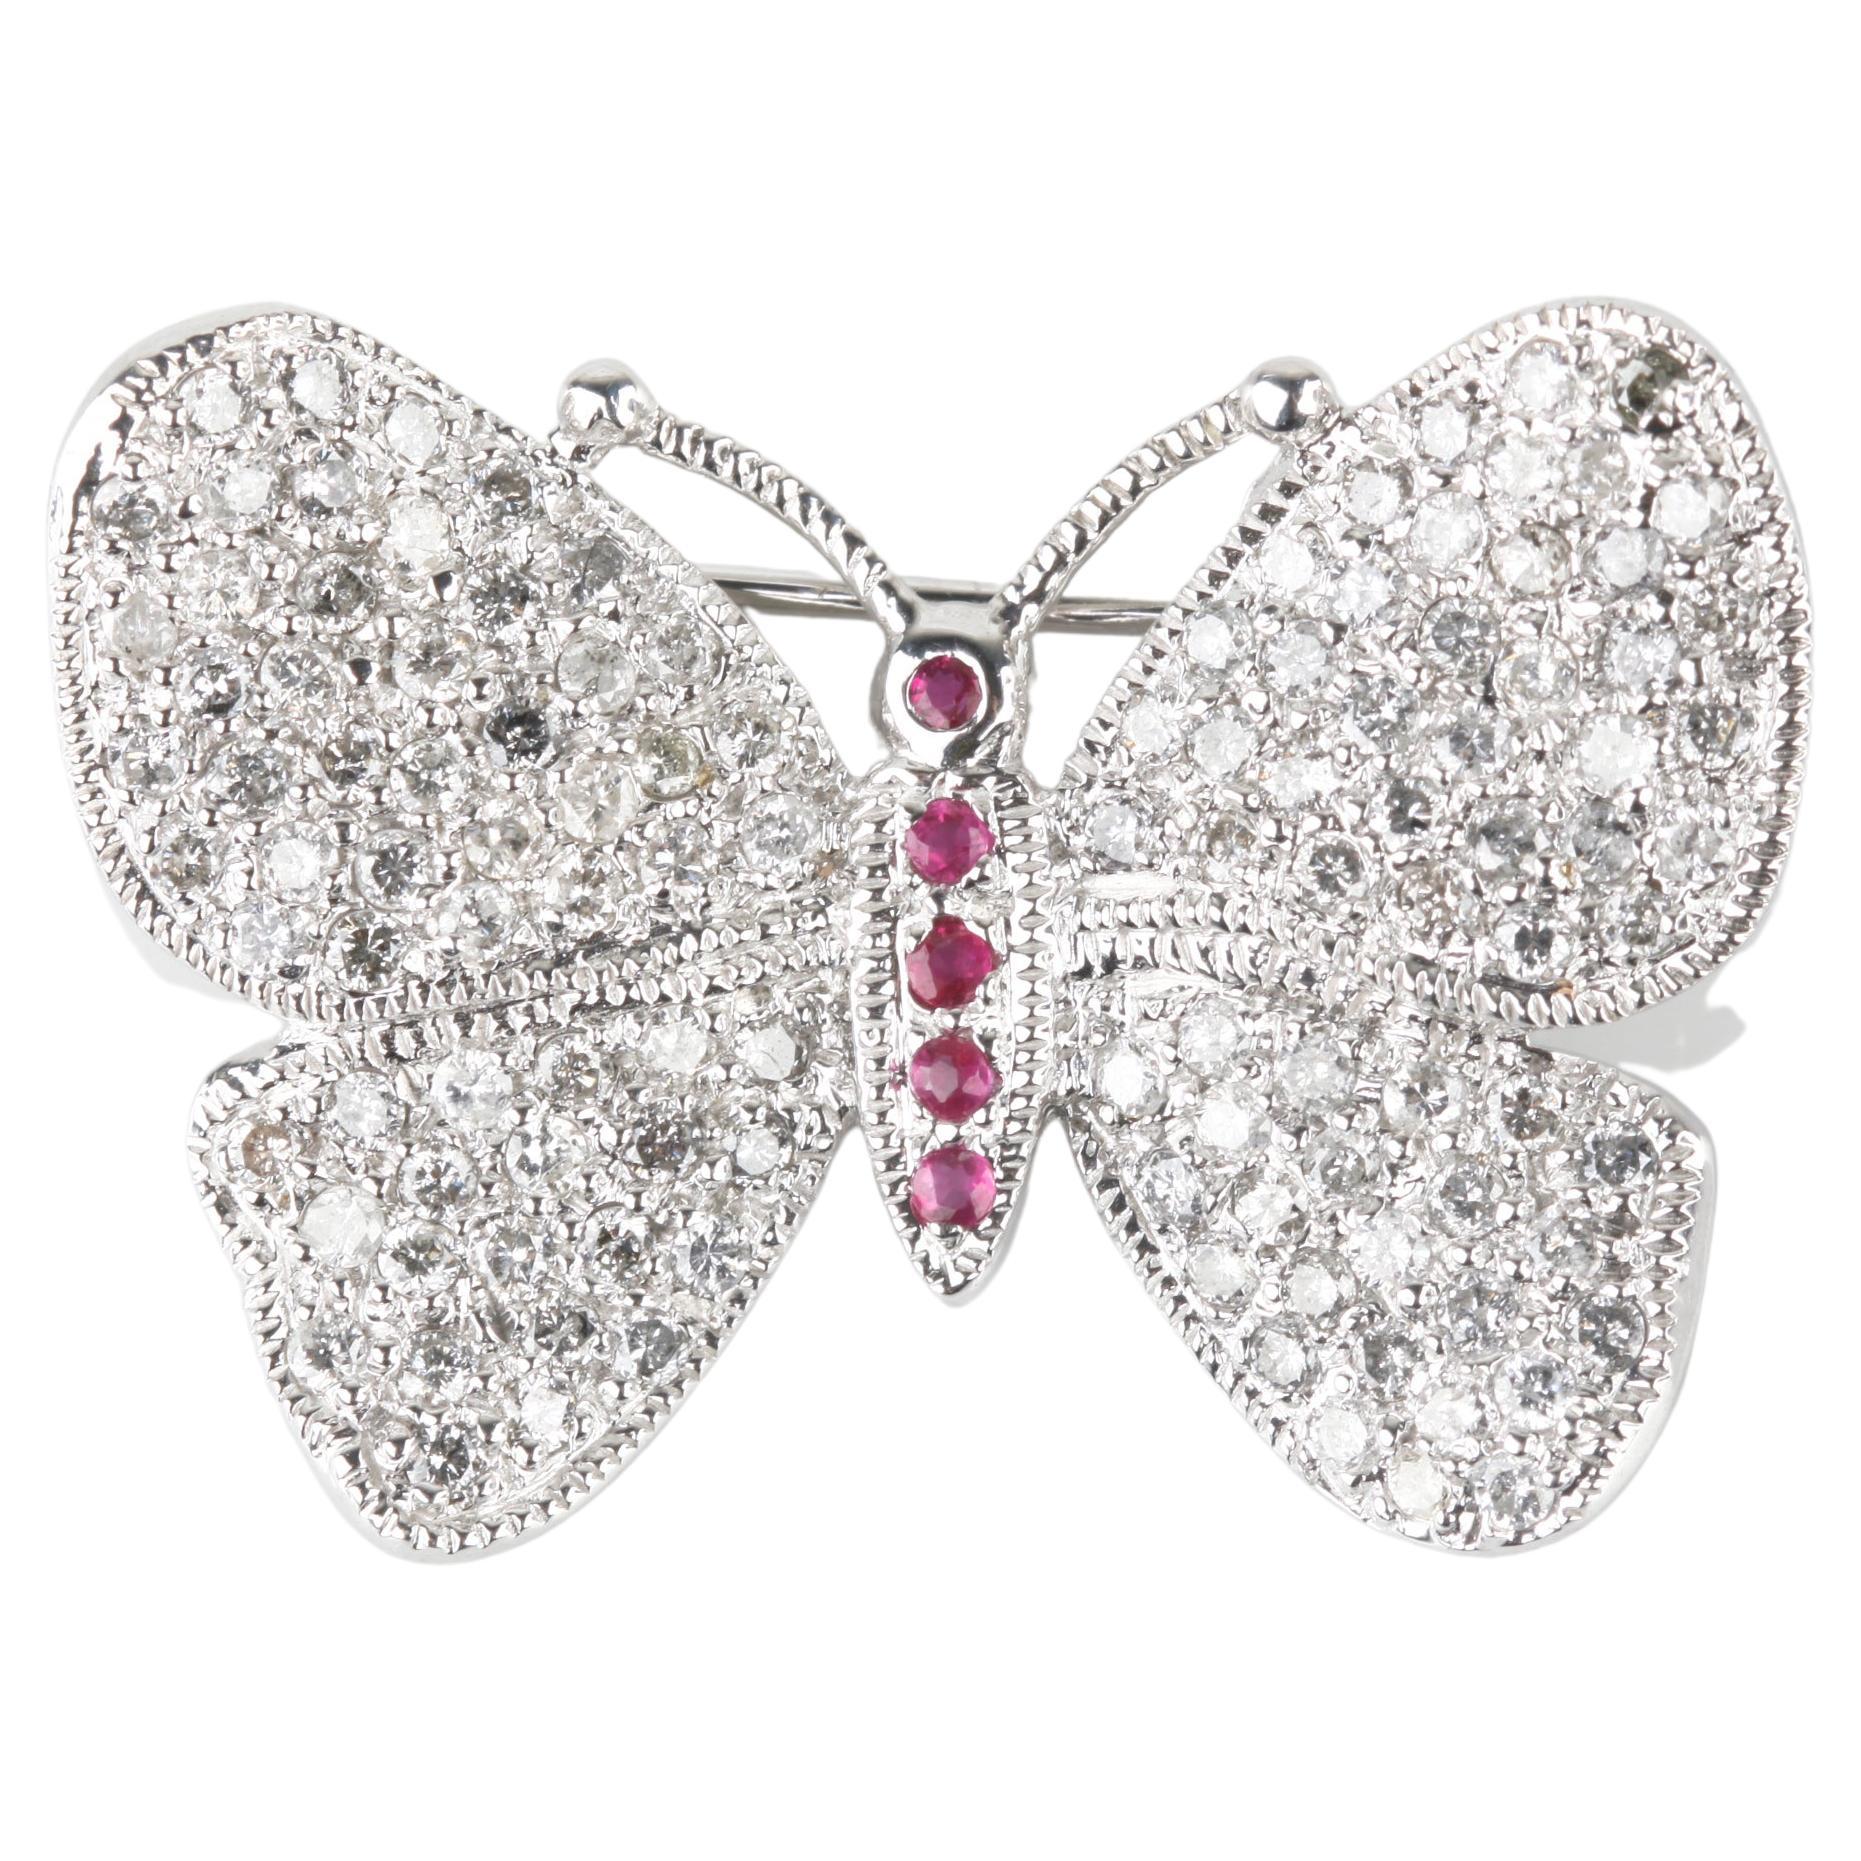 14k White Gold Butterfly Pave 1.87 Carat Diamond Brooch with Ruby Accents